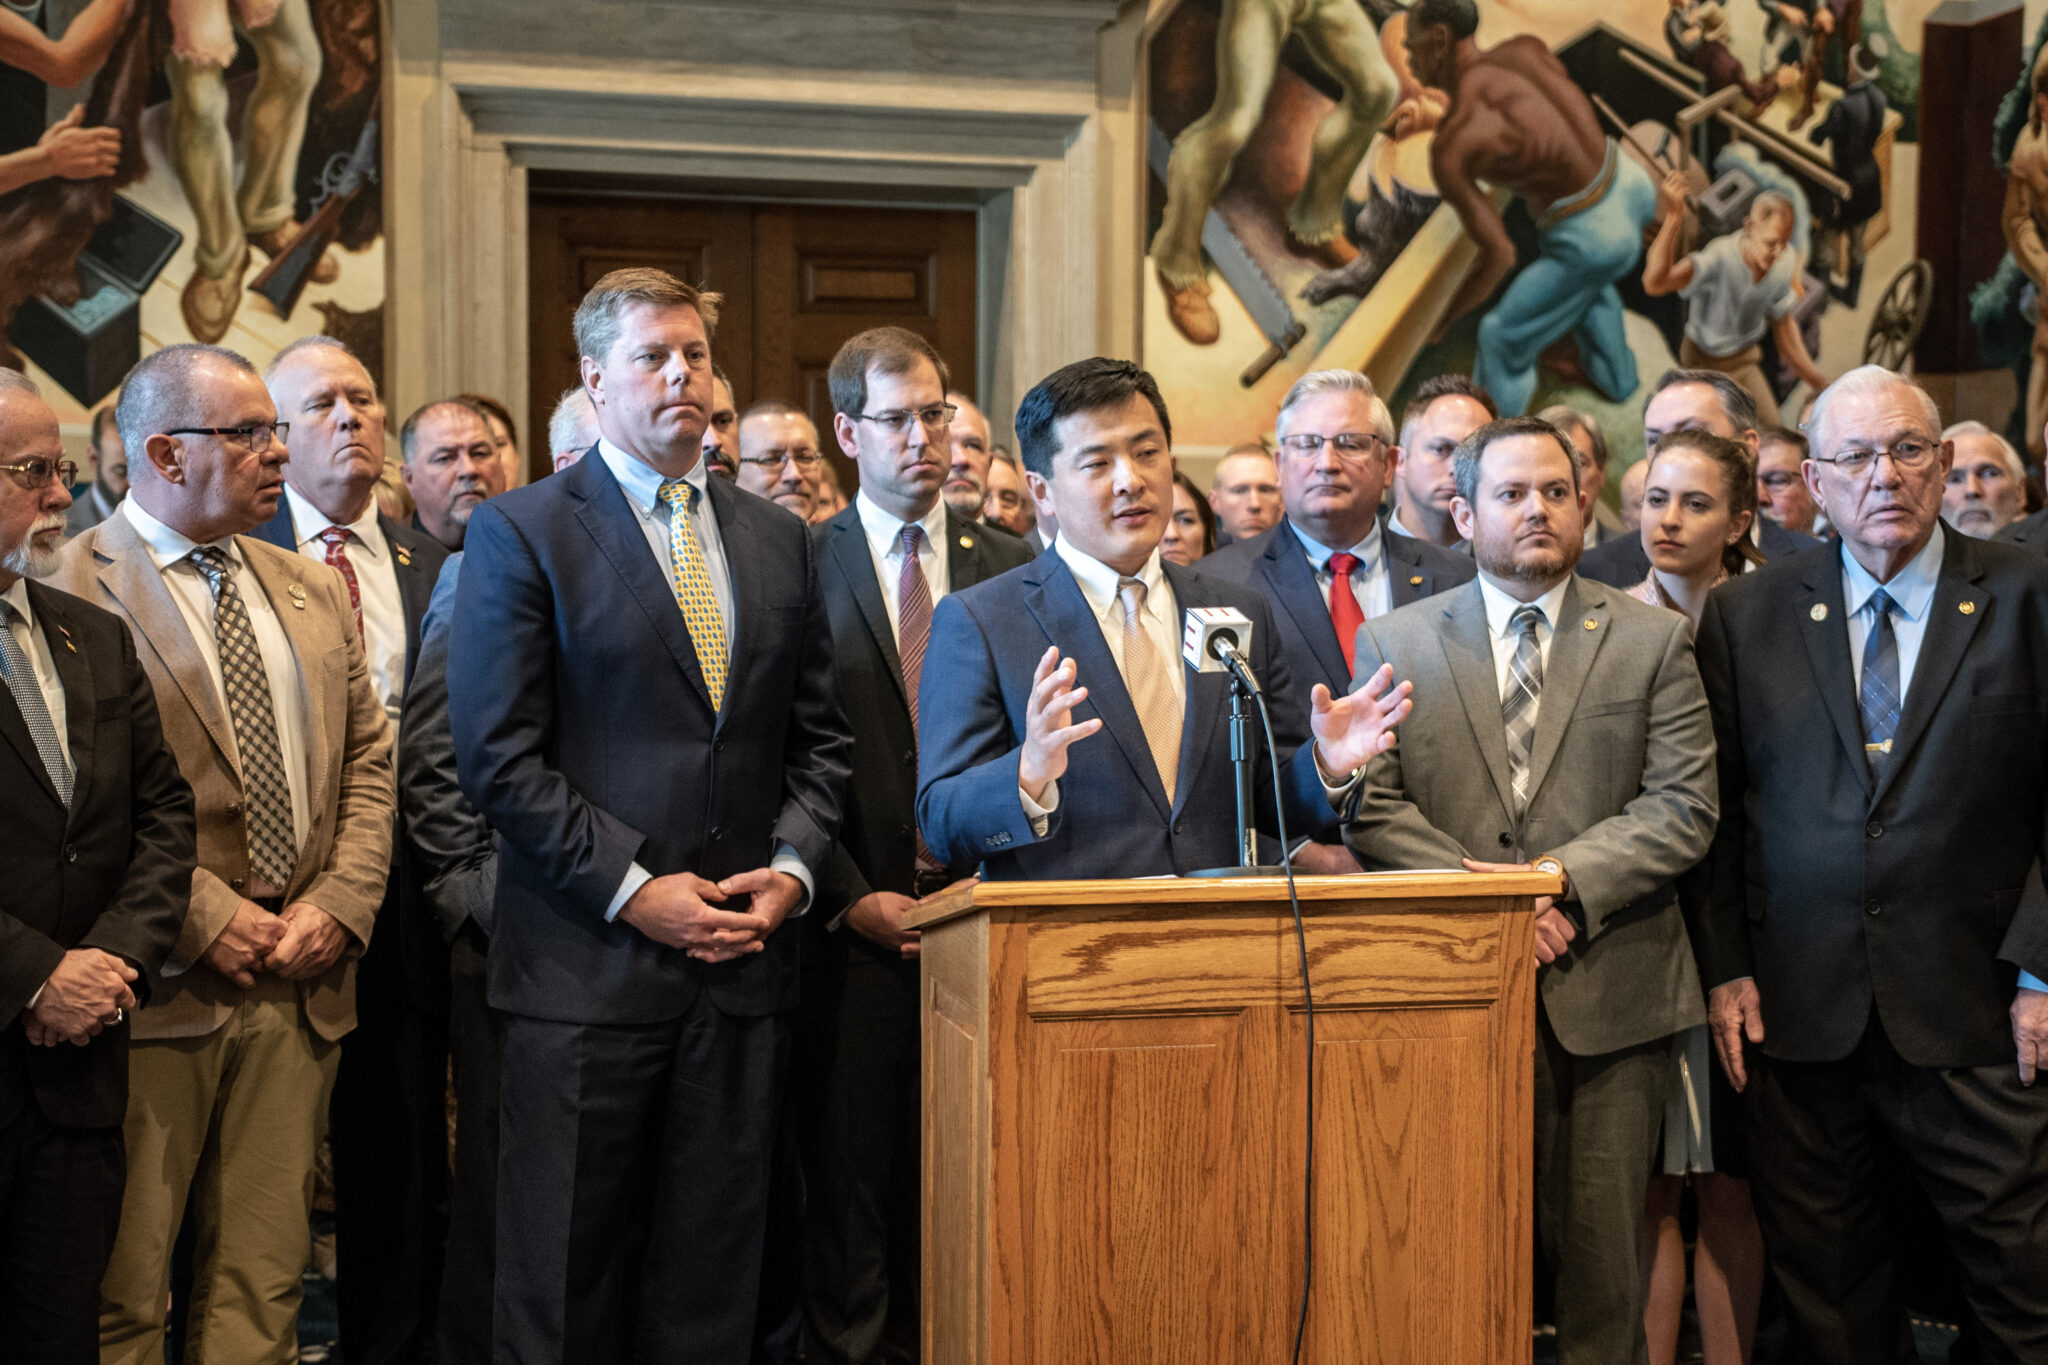 House Majority Leader Jon Patterson, R-Lee's Summit, speaks in a press conference after voting against a bill seeking to ban gender-affirming care for minors (Annelise Hanshaw/Missouri Independent).